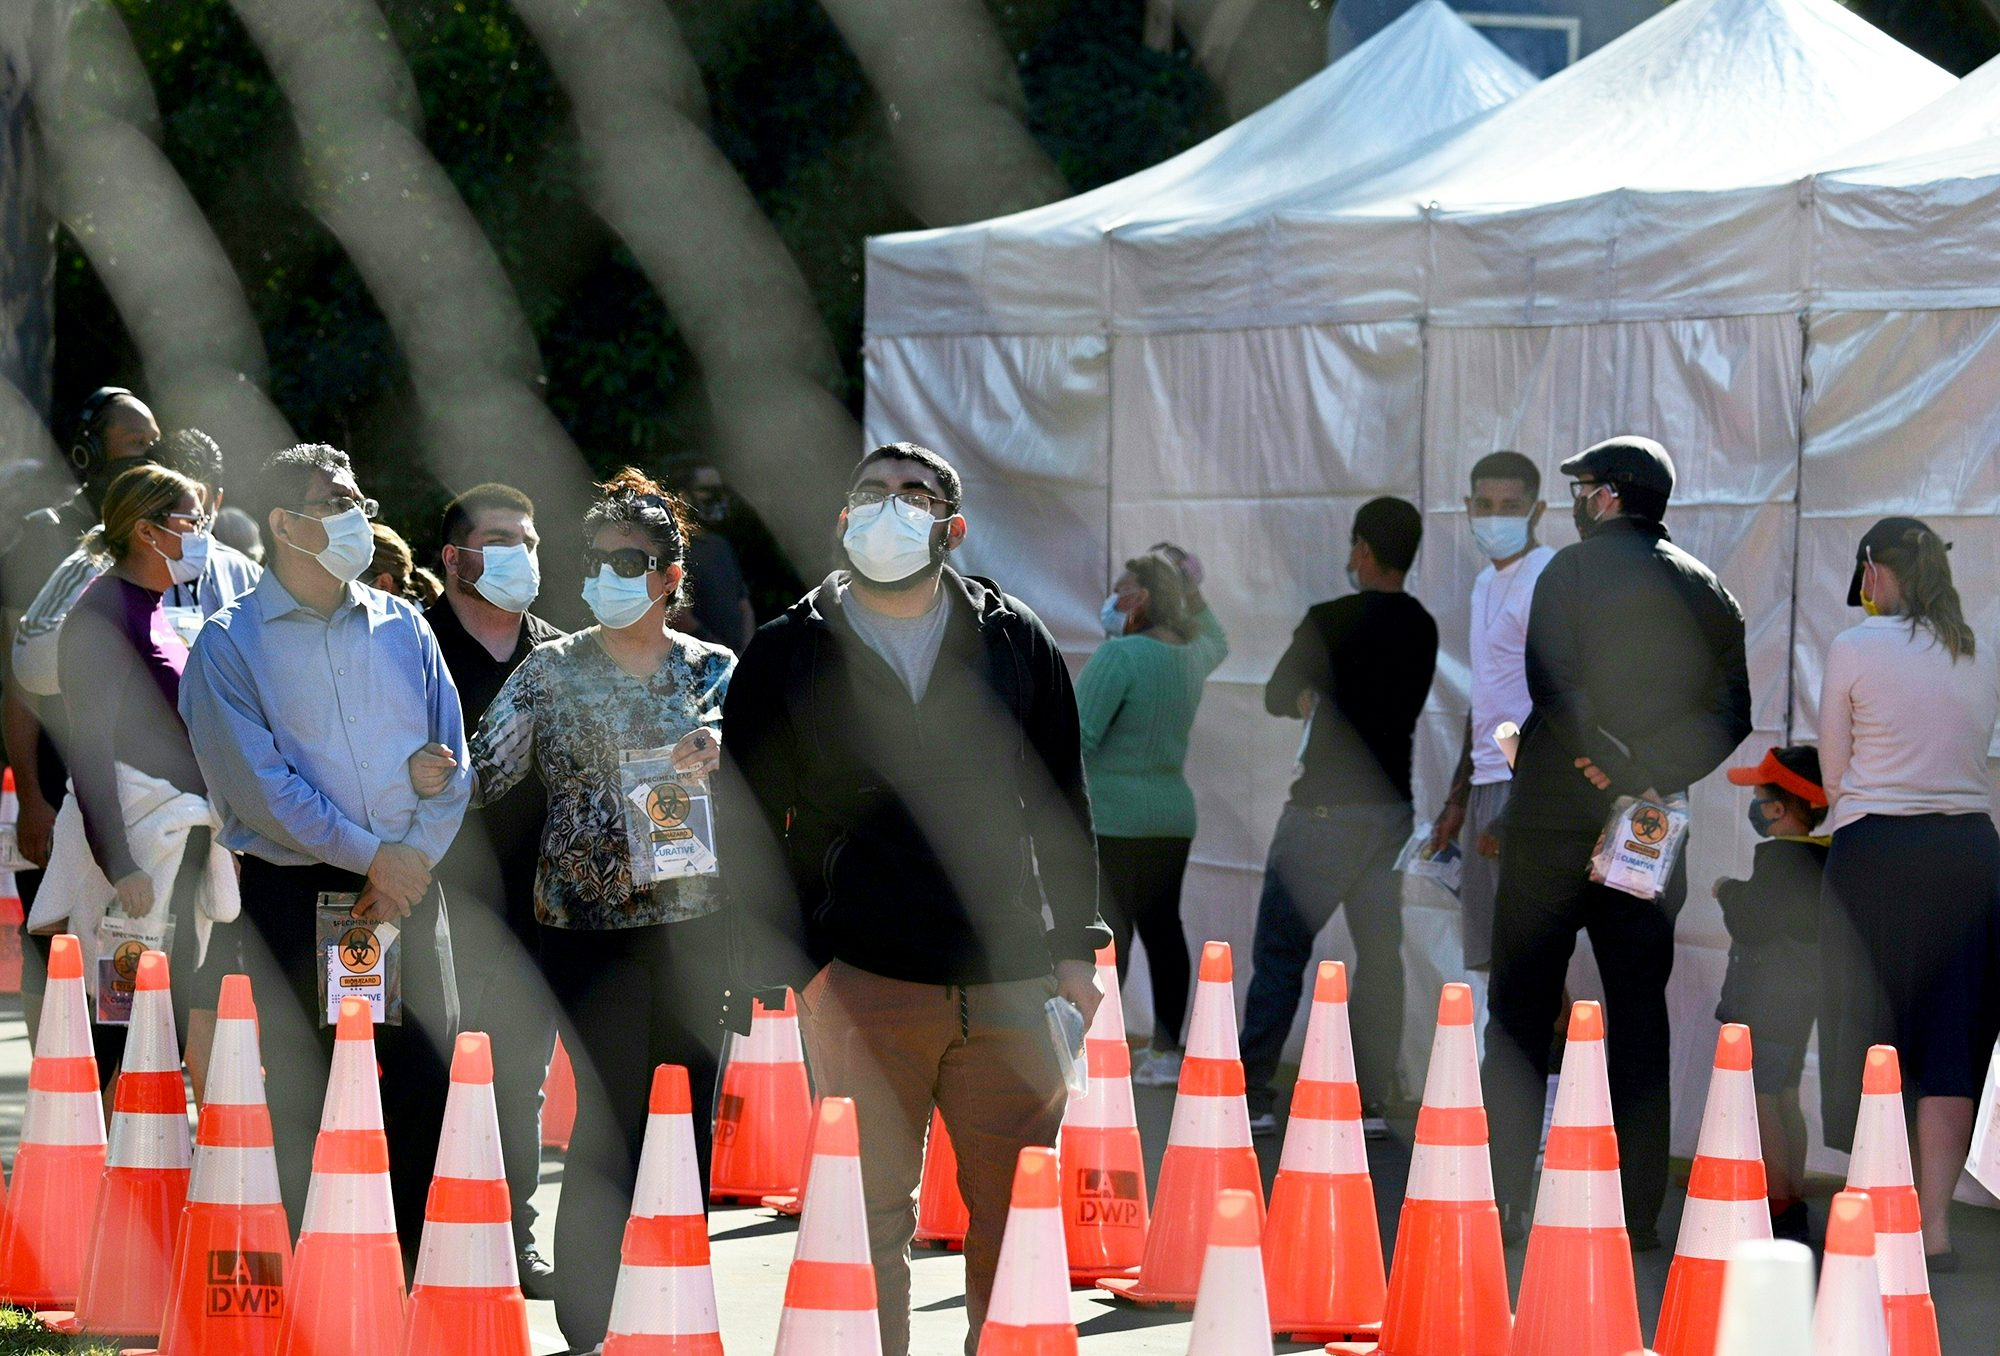 PHOTO: People wait in long lines for coronavius tests at a walk-up Covid-19 testing site in San Fernando, Calif., Nov. 24, 2020.